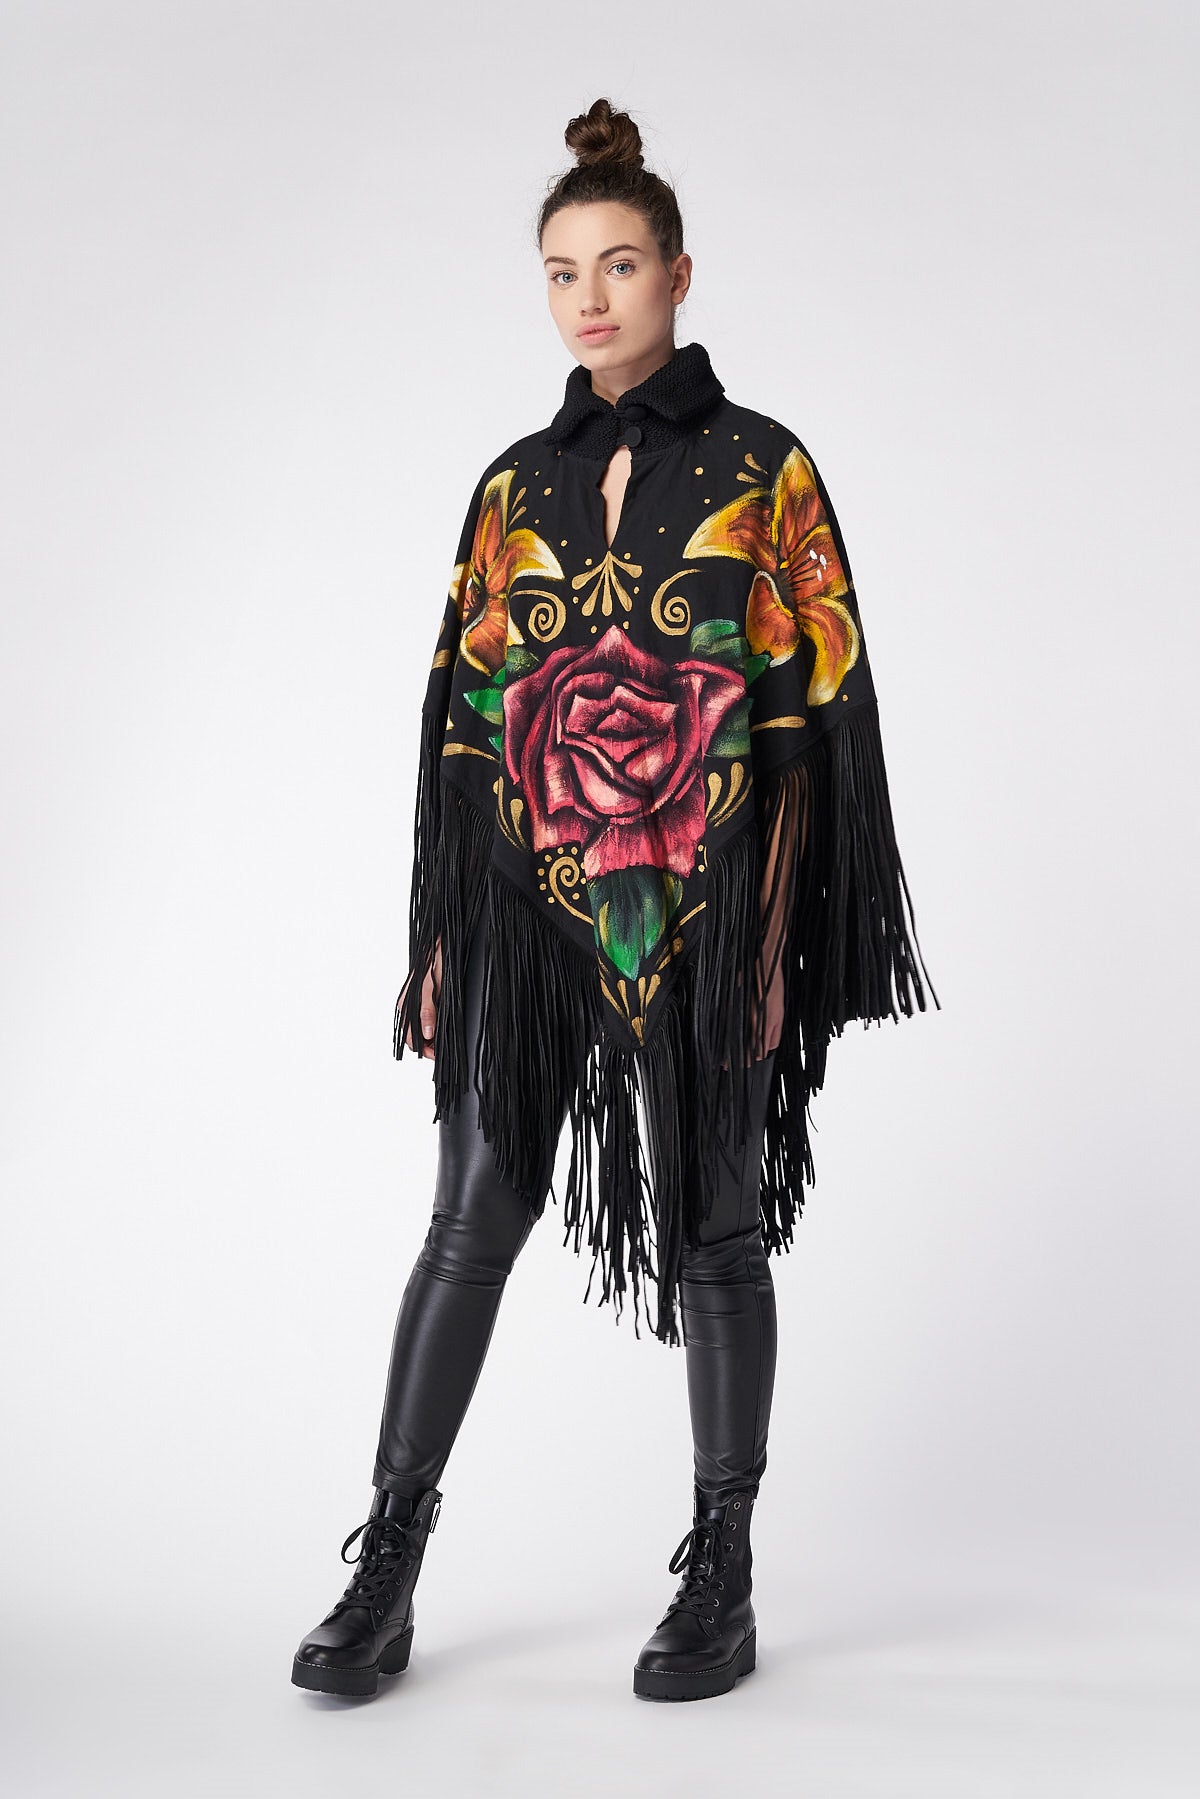 HAND PAINTED SUEDE FRINGE PONCHO - FLORES